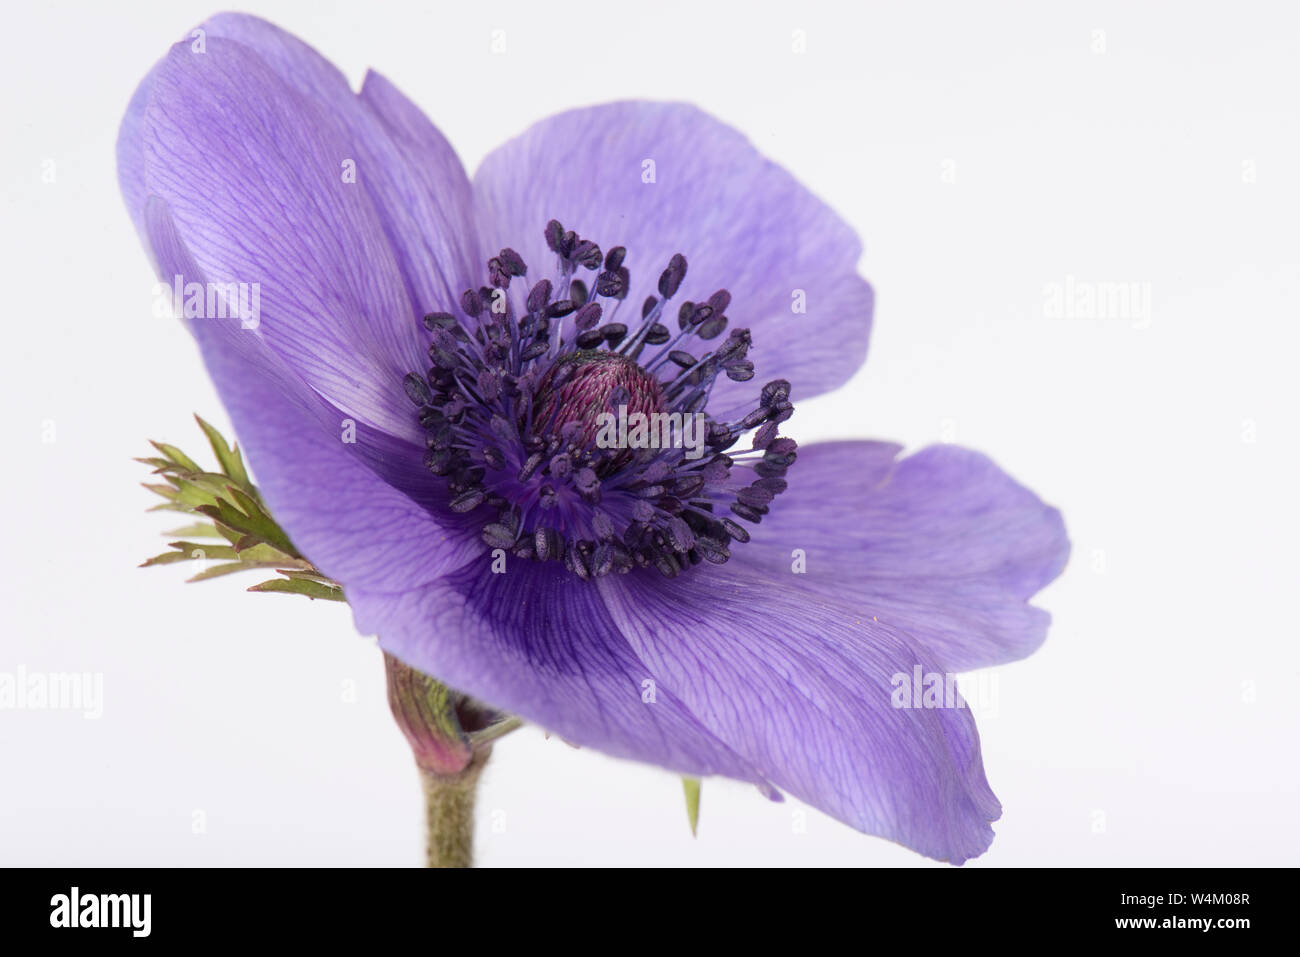 Blue flower of garden ornamental Anemone coronaria with petals, sepals, calyx,  central anthers, stamens, stigma and style Stock Photo